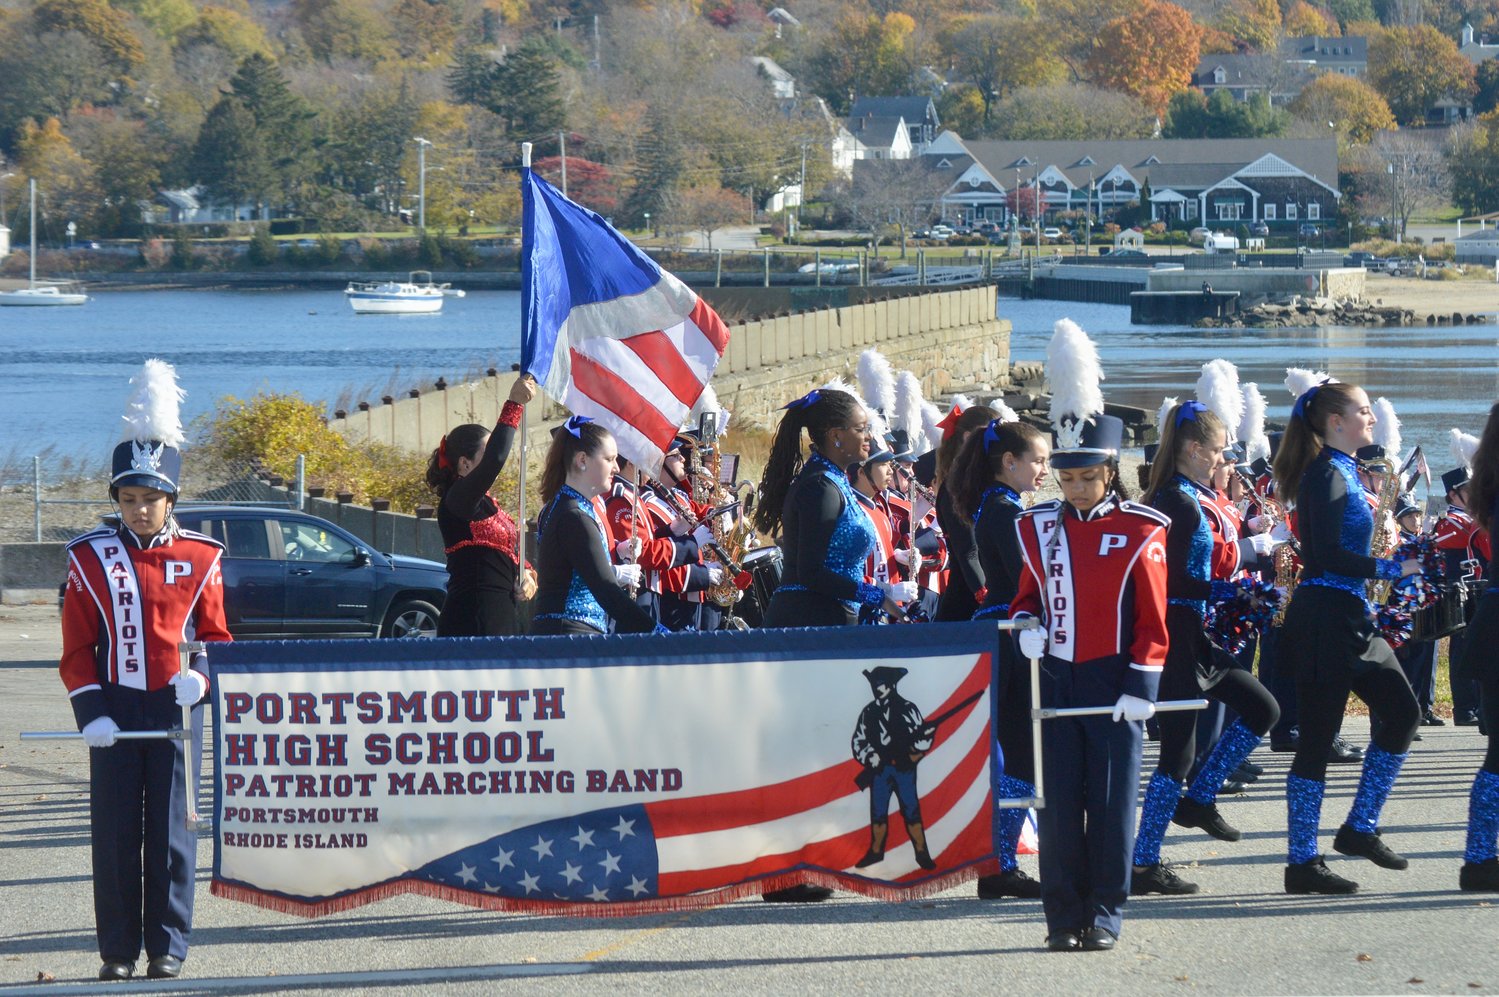 The PHS Marching Band warms up before the parade, with the Stone Bridge abutment and Teddy’s Beach in the background. Identical twins and PHS sophomores Makayla (left) and Keira Boxell are holding the banner.